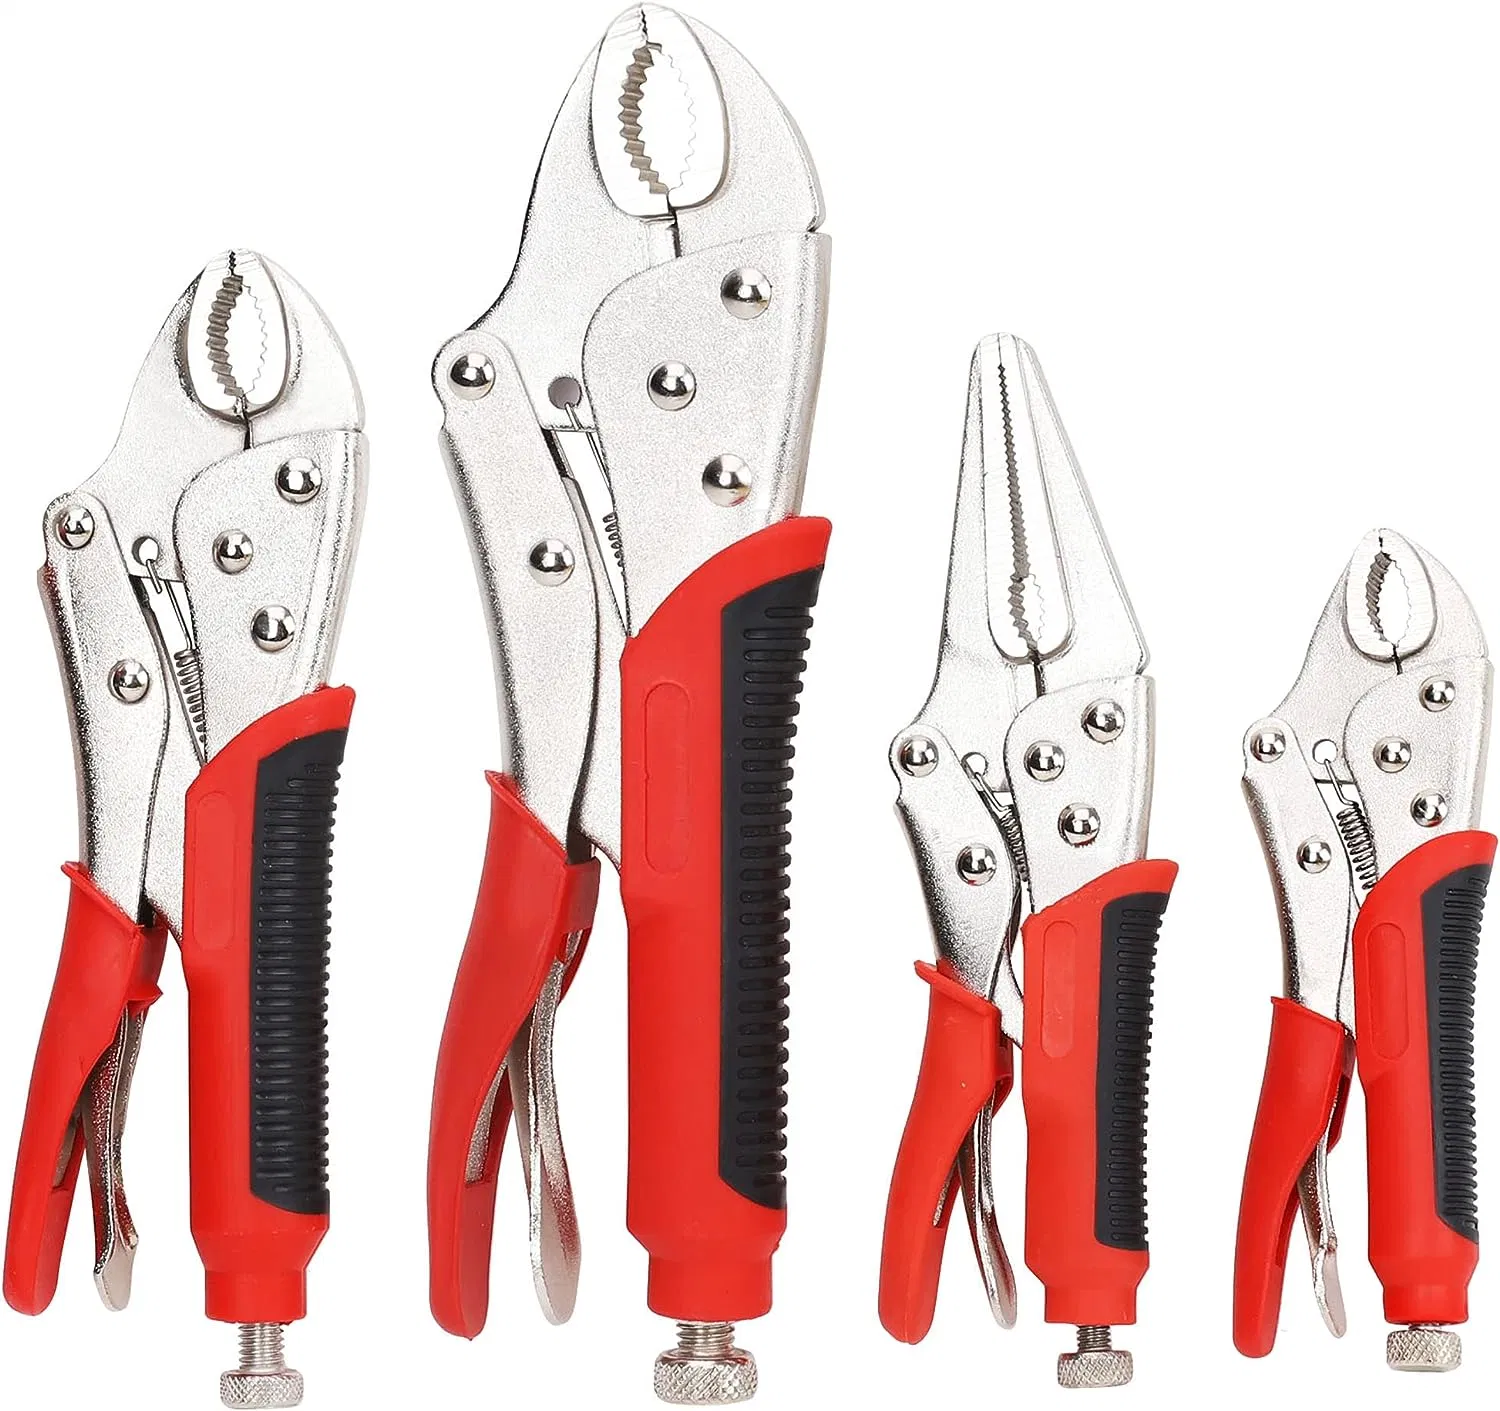 4-Piece Locking Pliers Set with Heavy Duty Grip, 5", 7" and 10" Curved Jaw Locking Pliers, 6-1/2" Long Nose Locking Pliers Included, Vise Grip Wrench Set